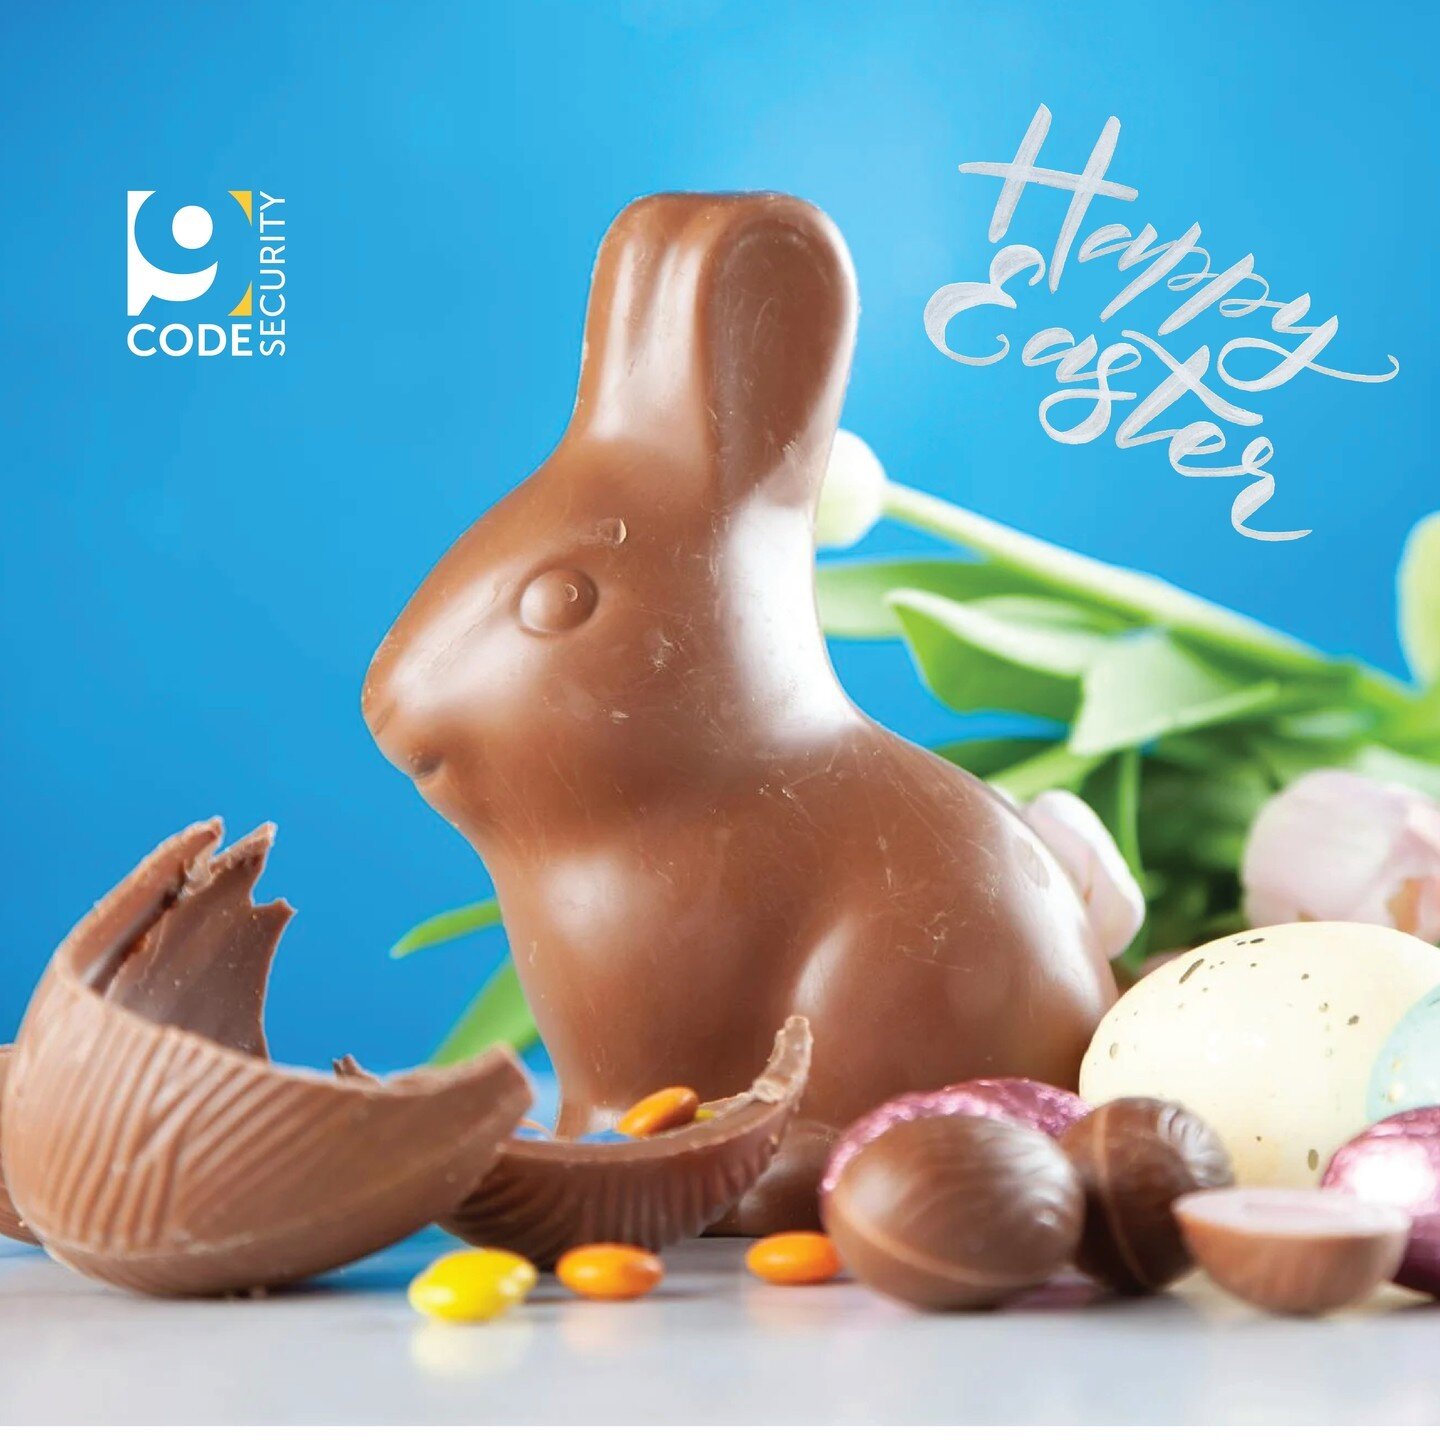 Wishing you and your loved ones a joyful and blessed Easter! May this special day bring you peace, happiness, and lots of chocolate eggs. Take this time to reflect on the beauty of life and the joy that surrounds us. From all of us, have a wonderful 